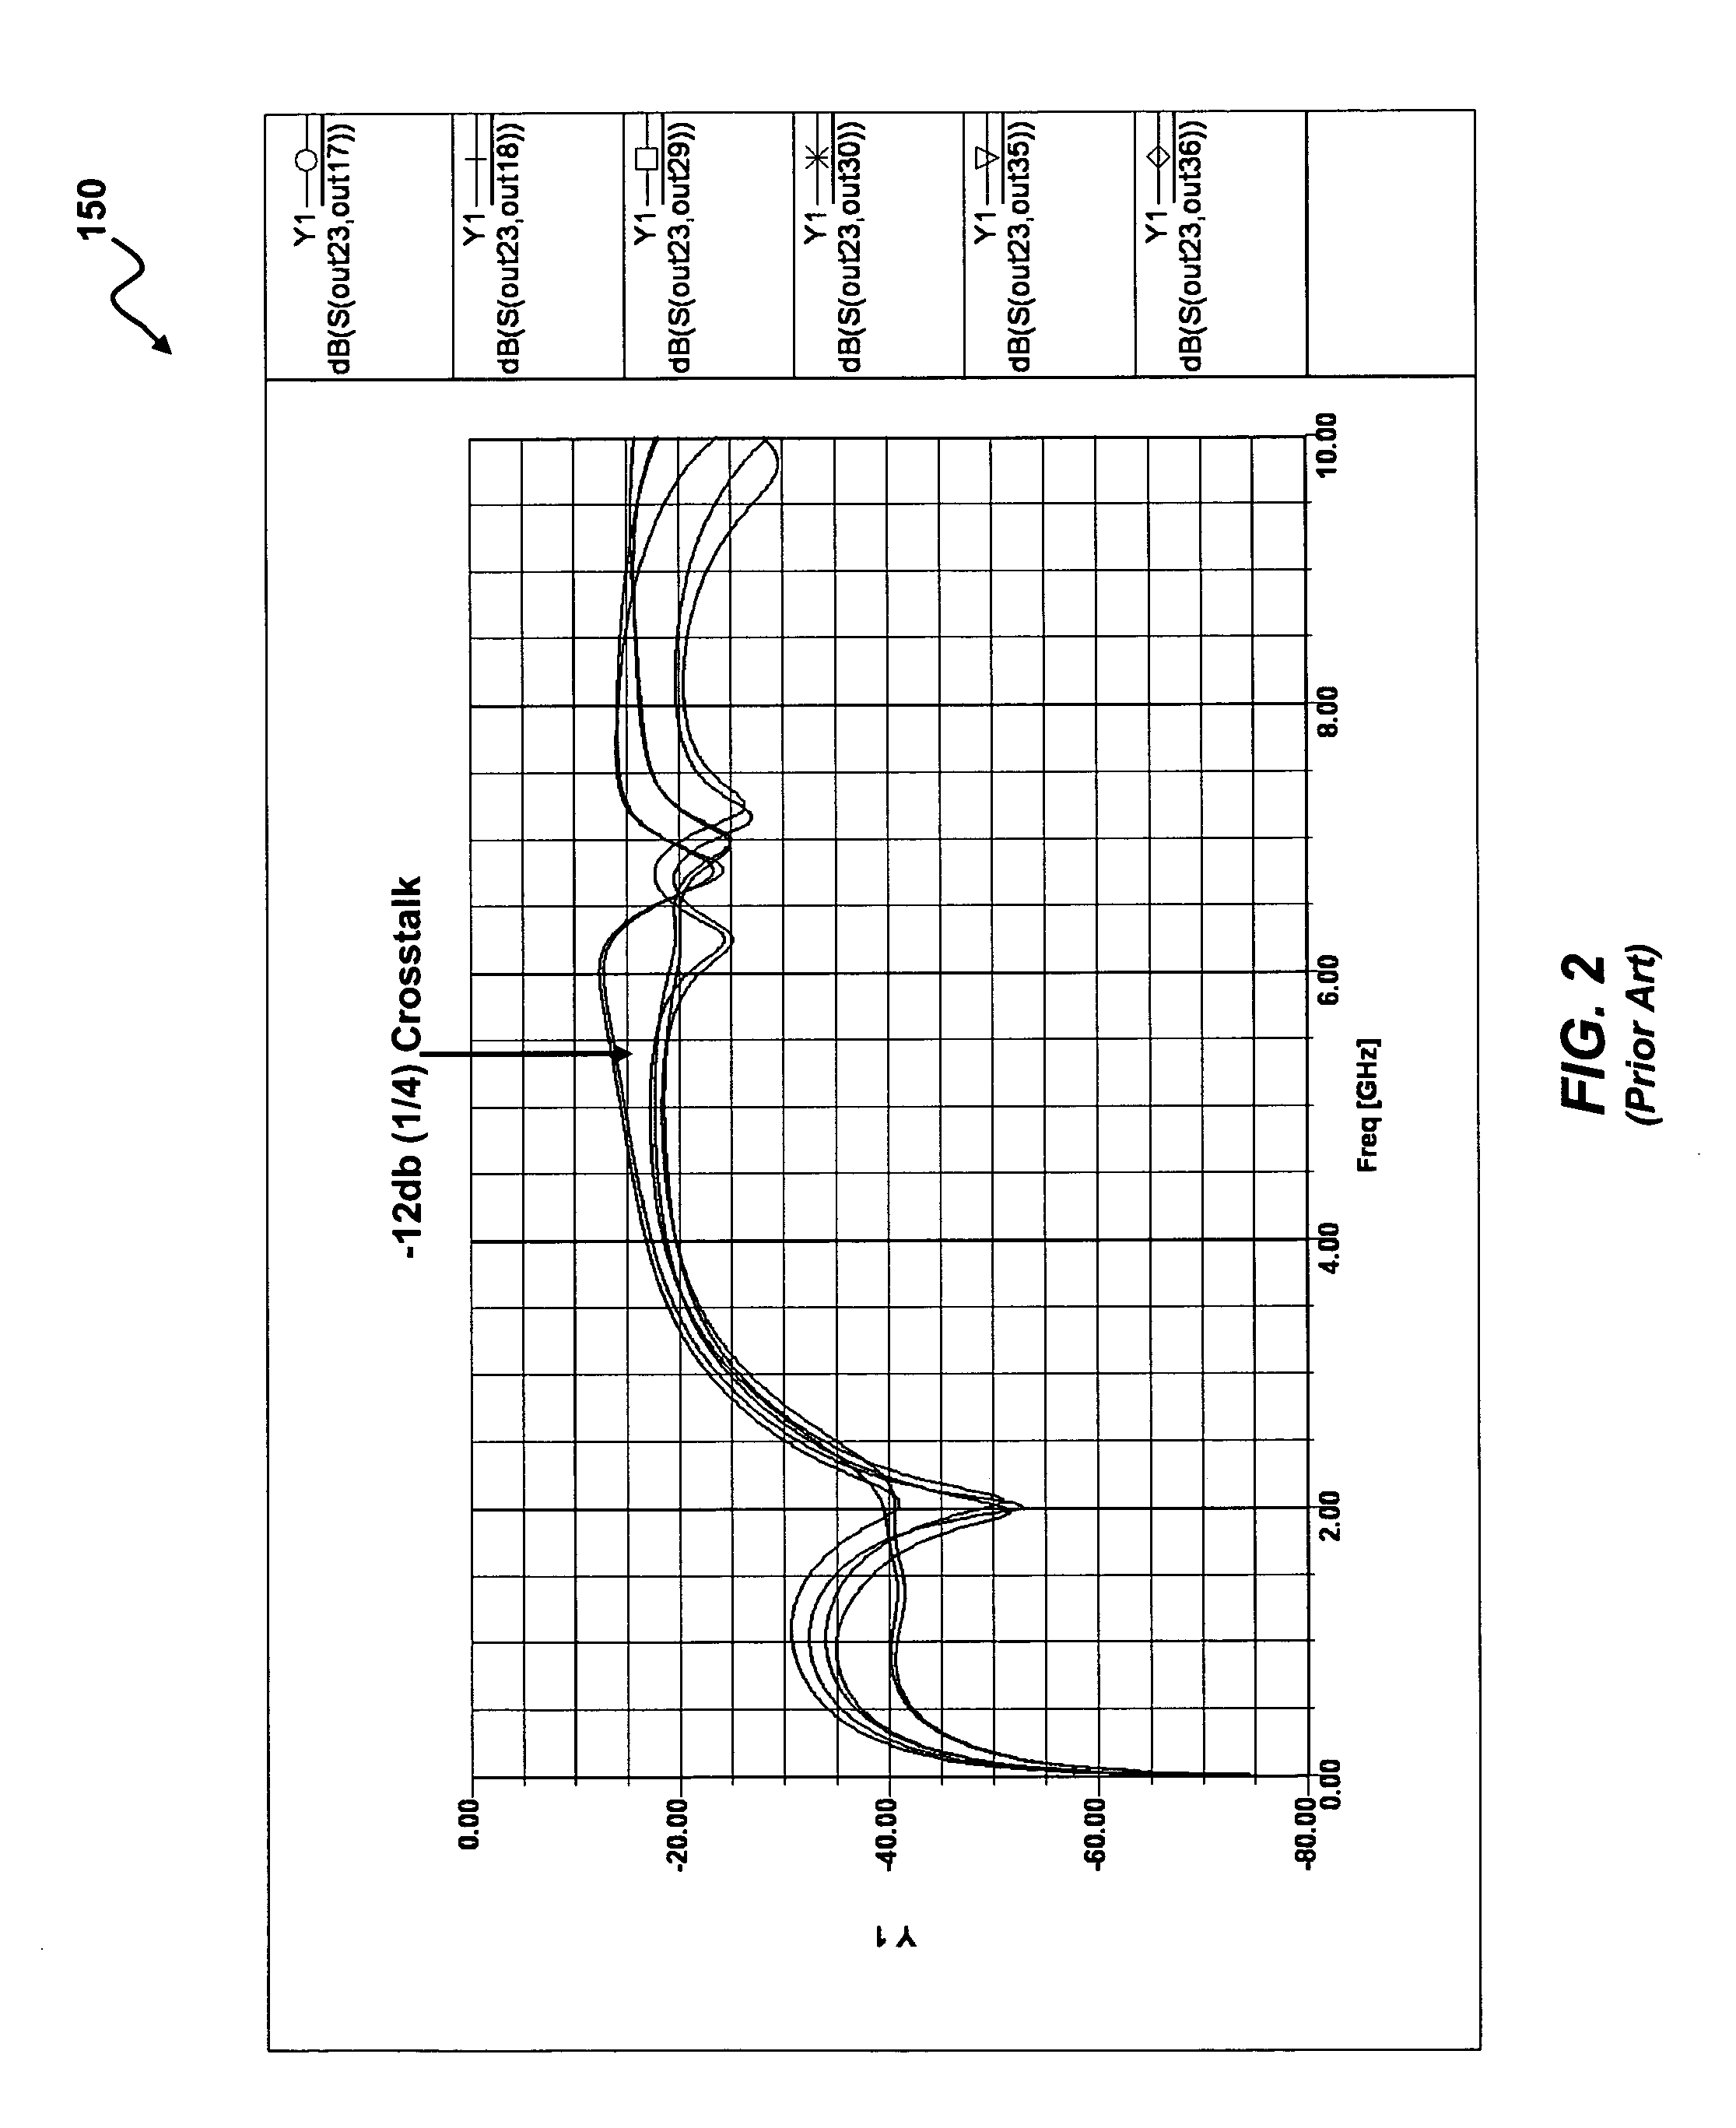 Integrated circuit package and system interface